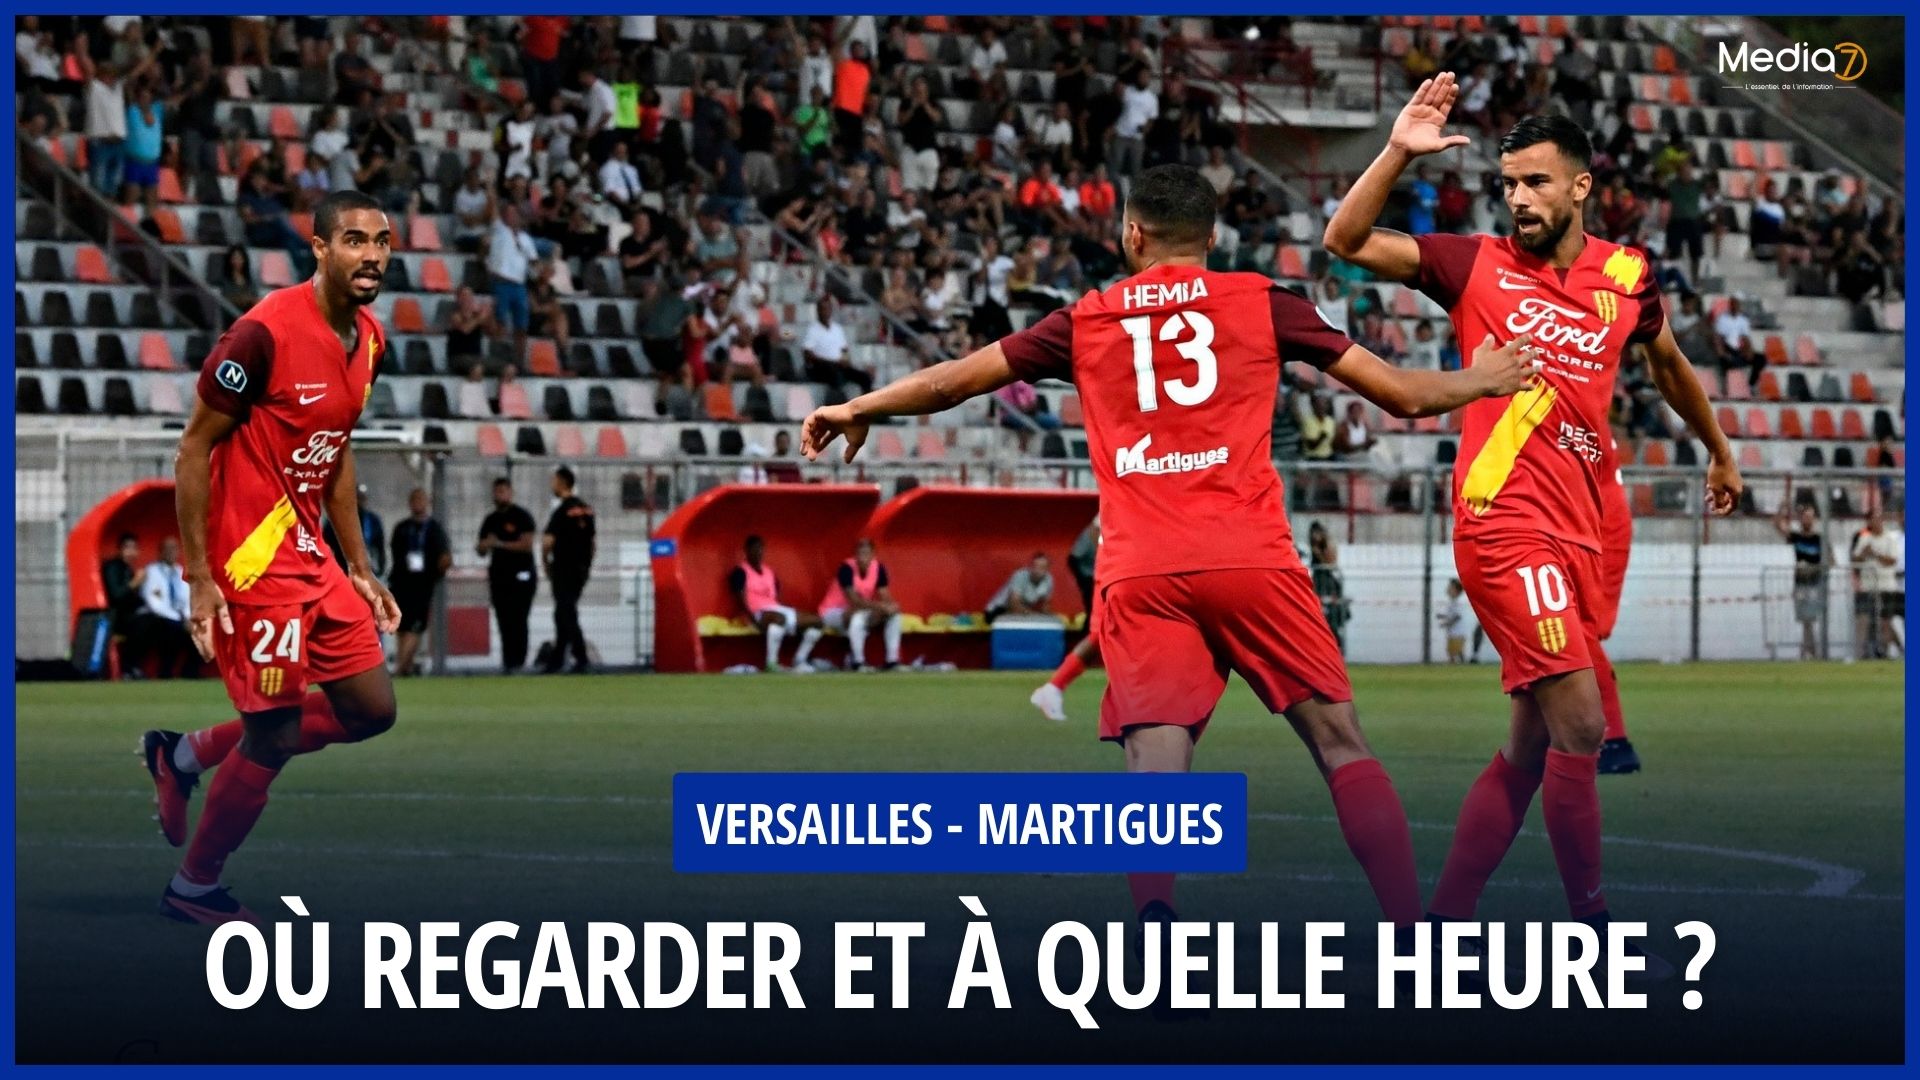 Match Versailles - Martigues Live: TV Broadcast and Streaming, Schedule not to be missed! - Media7